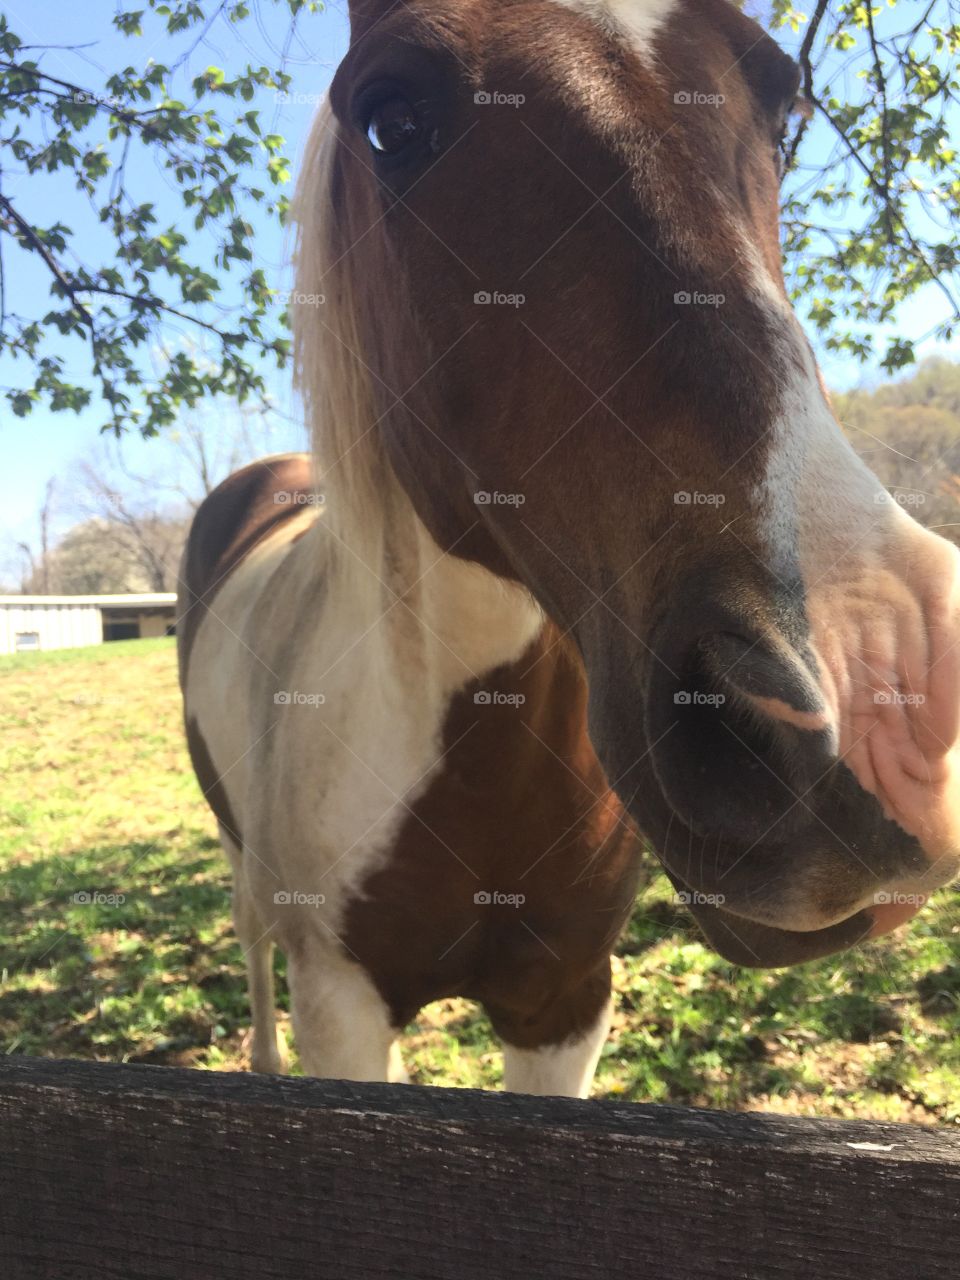 Brown and white friendly horse close up face